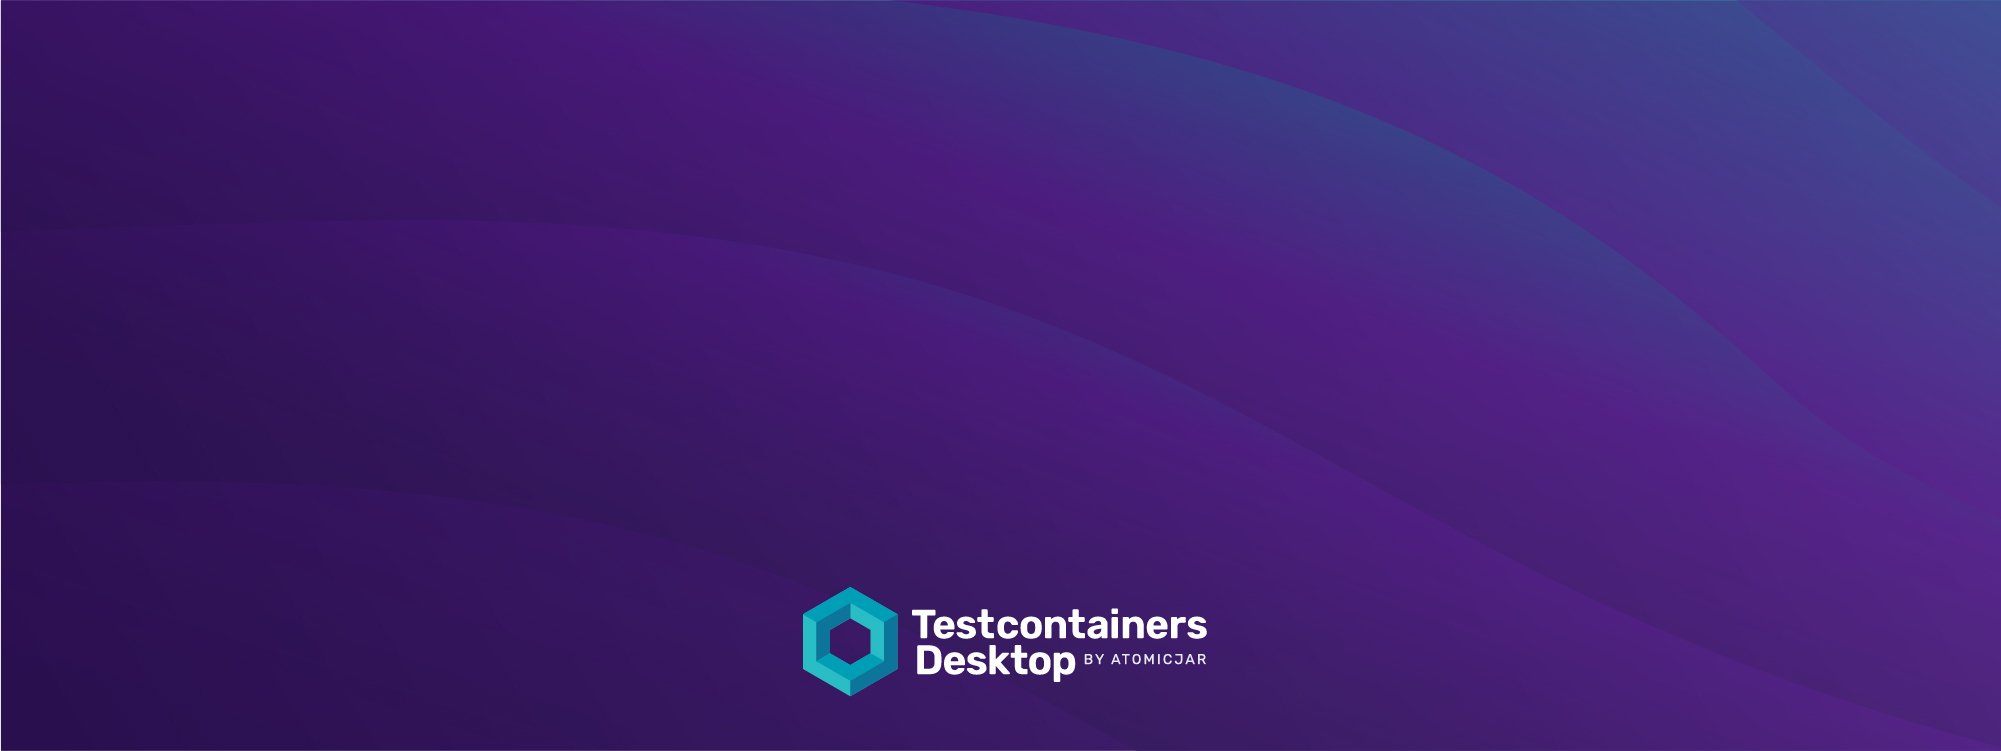 Announcing Testcontainers Desktop Free Application